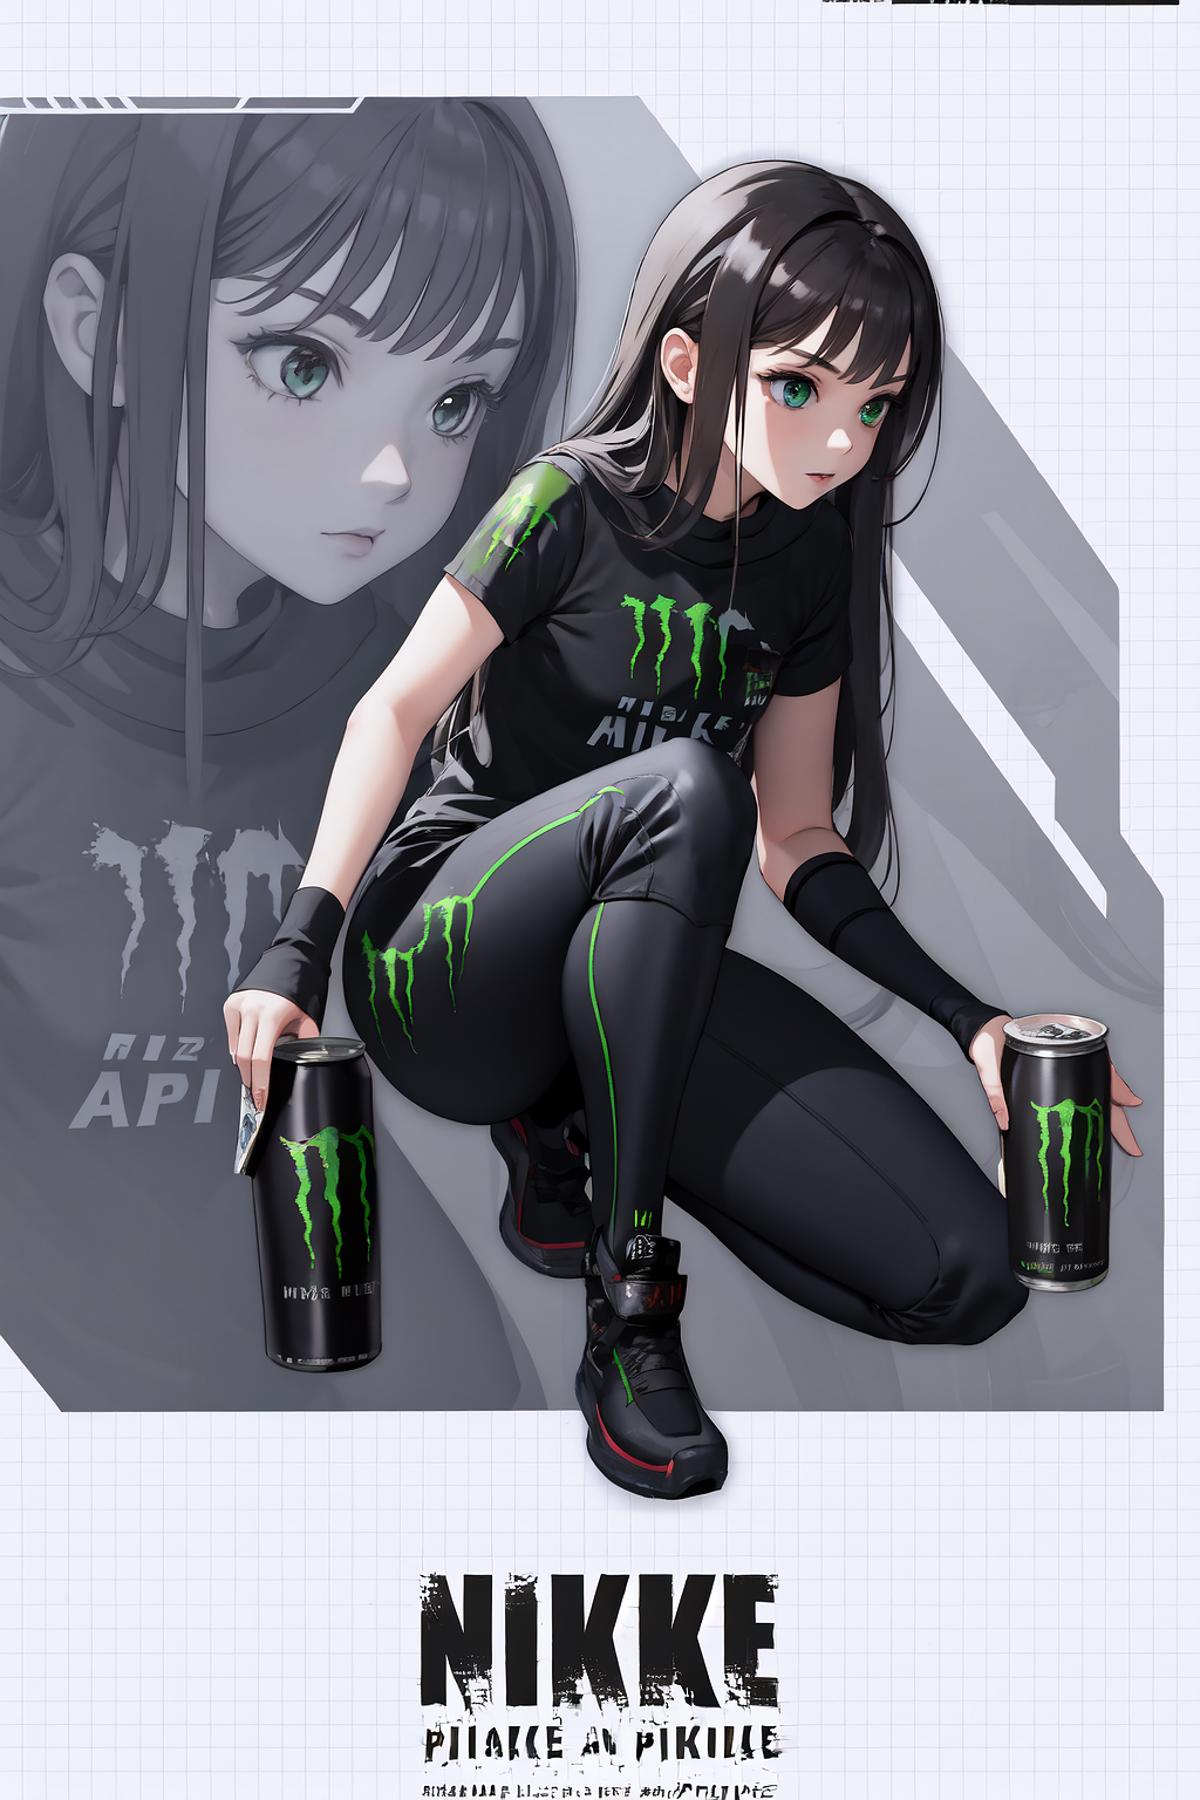 A girl in a black shirt and green pants holding two cans of Monster energy drink.